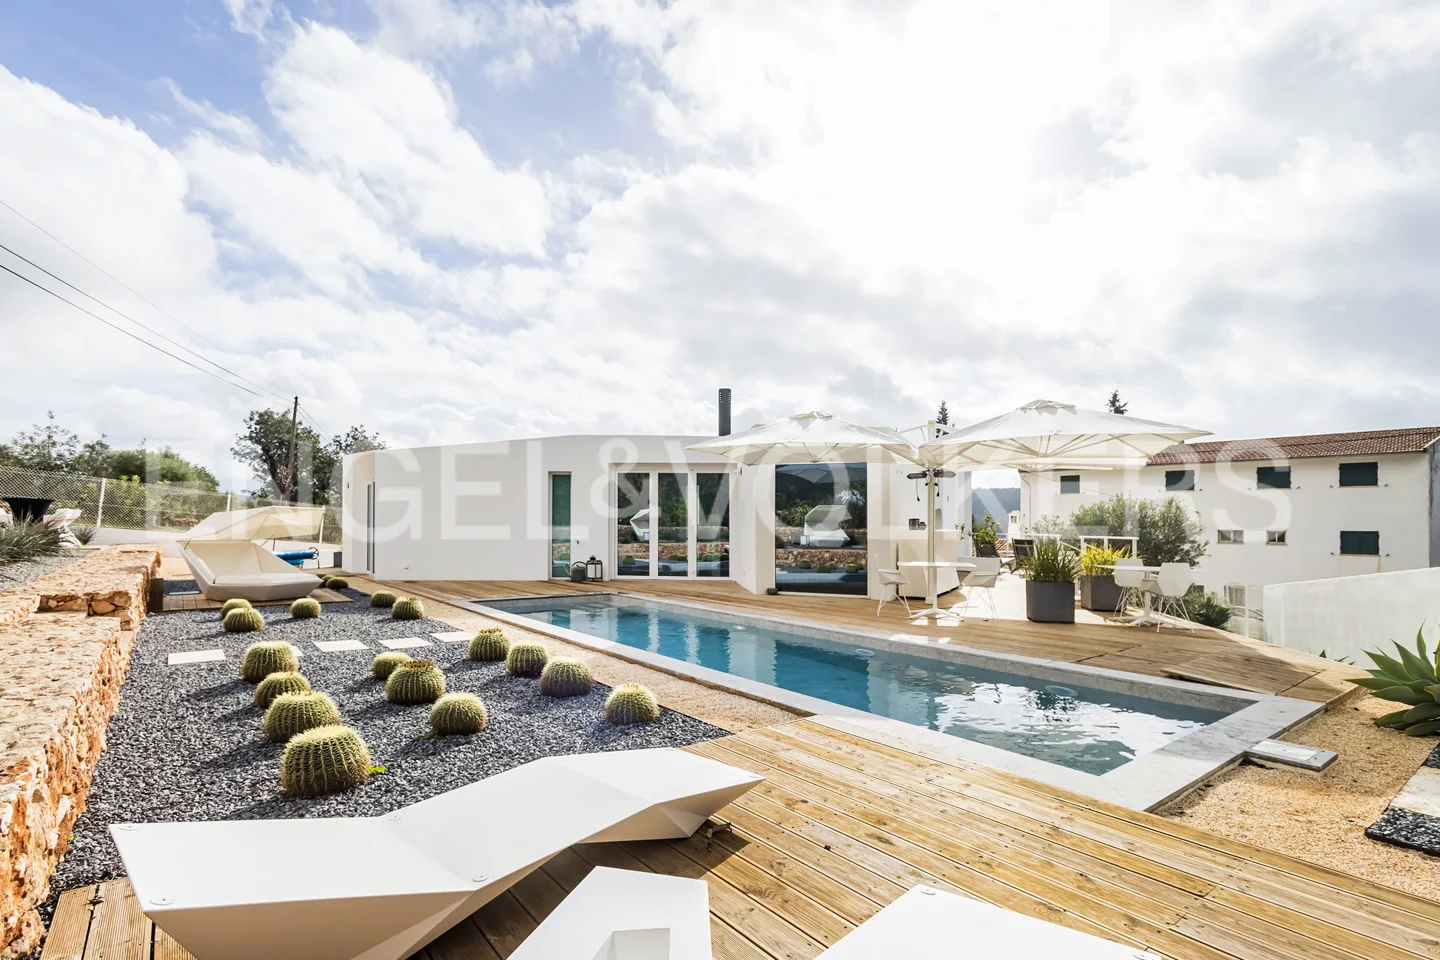 Villa located in the heart of the Algarve, in harmony with nature